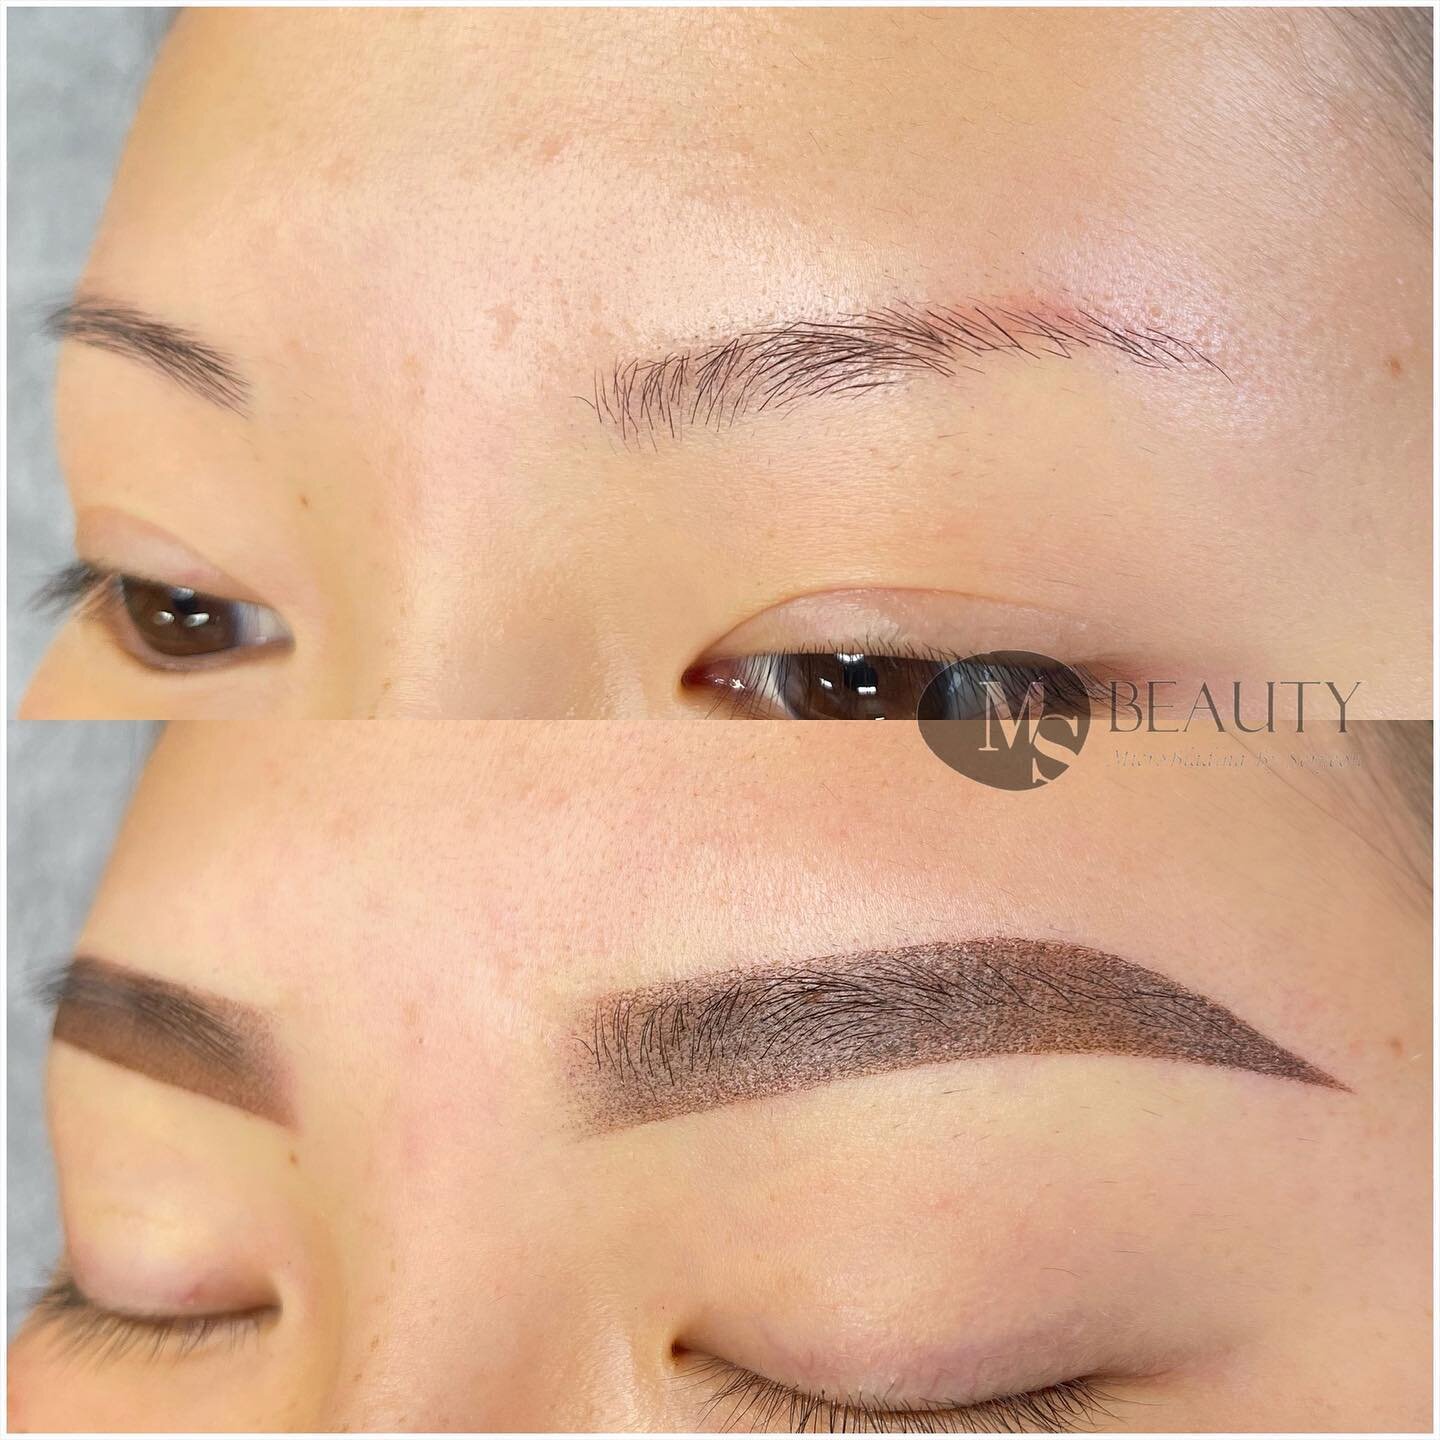 Ombr&eacute; shading 
Immediately after 

𝐌𝐬&nbsp;𝐛𝐞𝐚𝐮𝐭𝐲
⠀
▪️Introduced and published in reliable and recognized media oulets in Korea (VJ특공대,&nbsp;무한지대&nbsp;큐등&nbsp;다수의&nbsp;언론.잡지에&nbsp;소개됨) 
▪️Acquired Cosmetolog